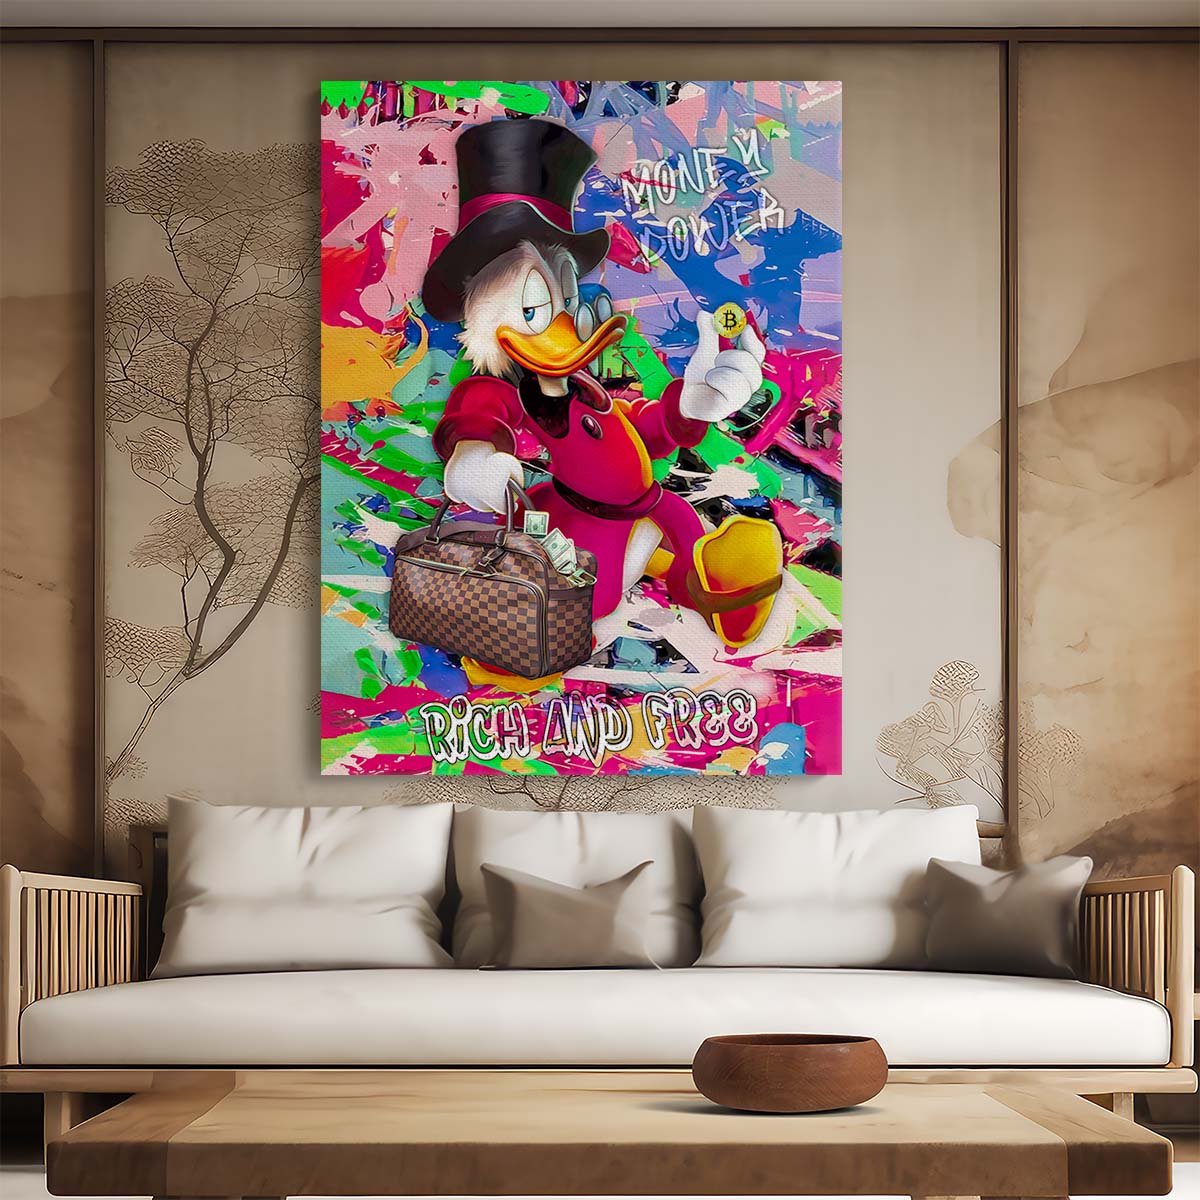 Scrooge McDuck Bitcoin Money Power Wall Art by Luxuriance Designs. Made in USA.